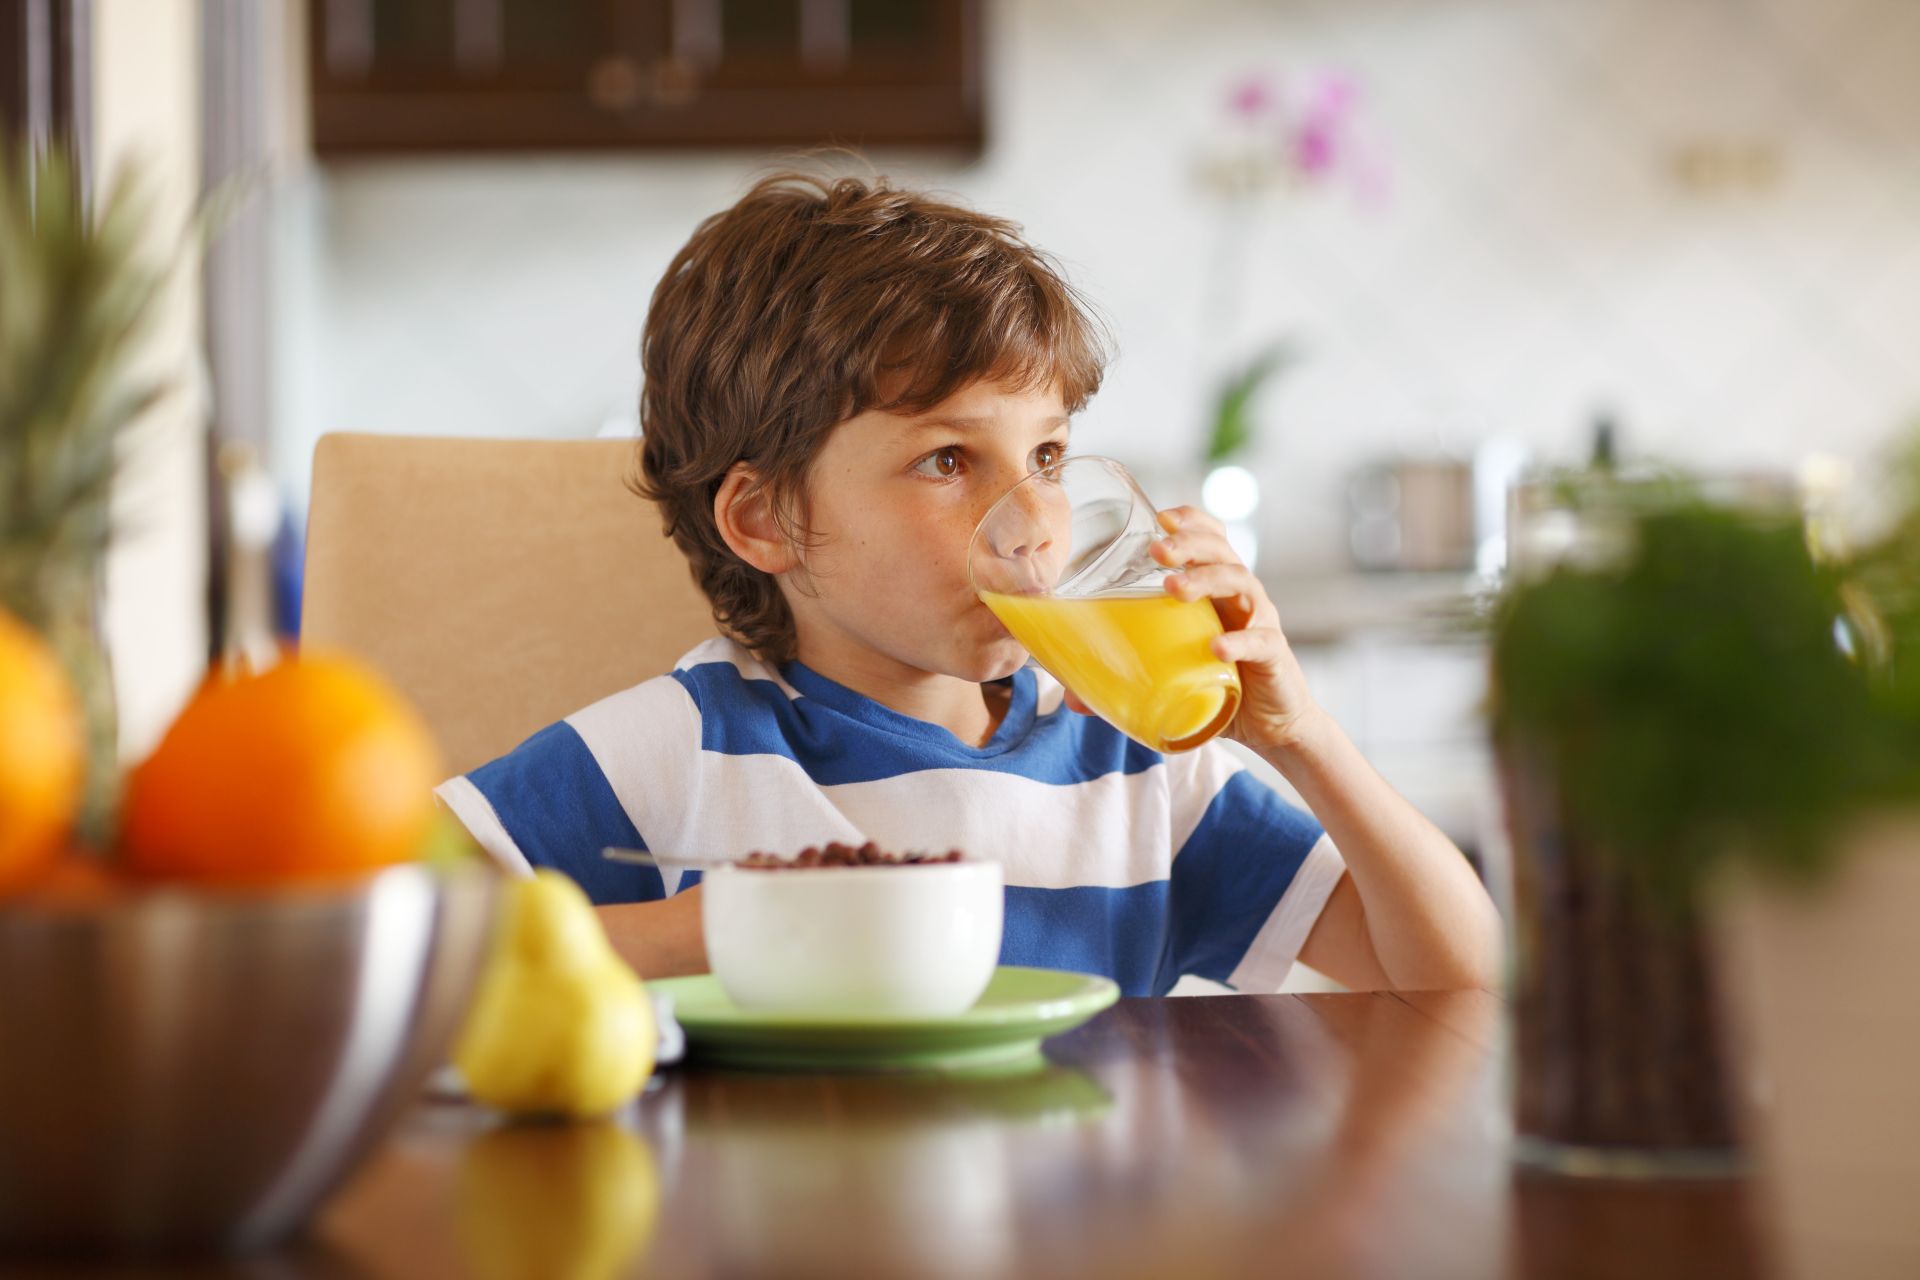 Why is it so important for children to have breakfast in the morning?